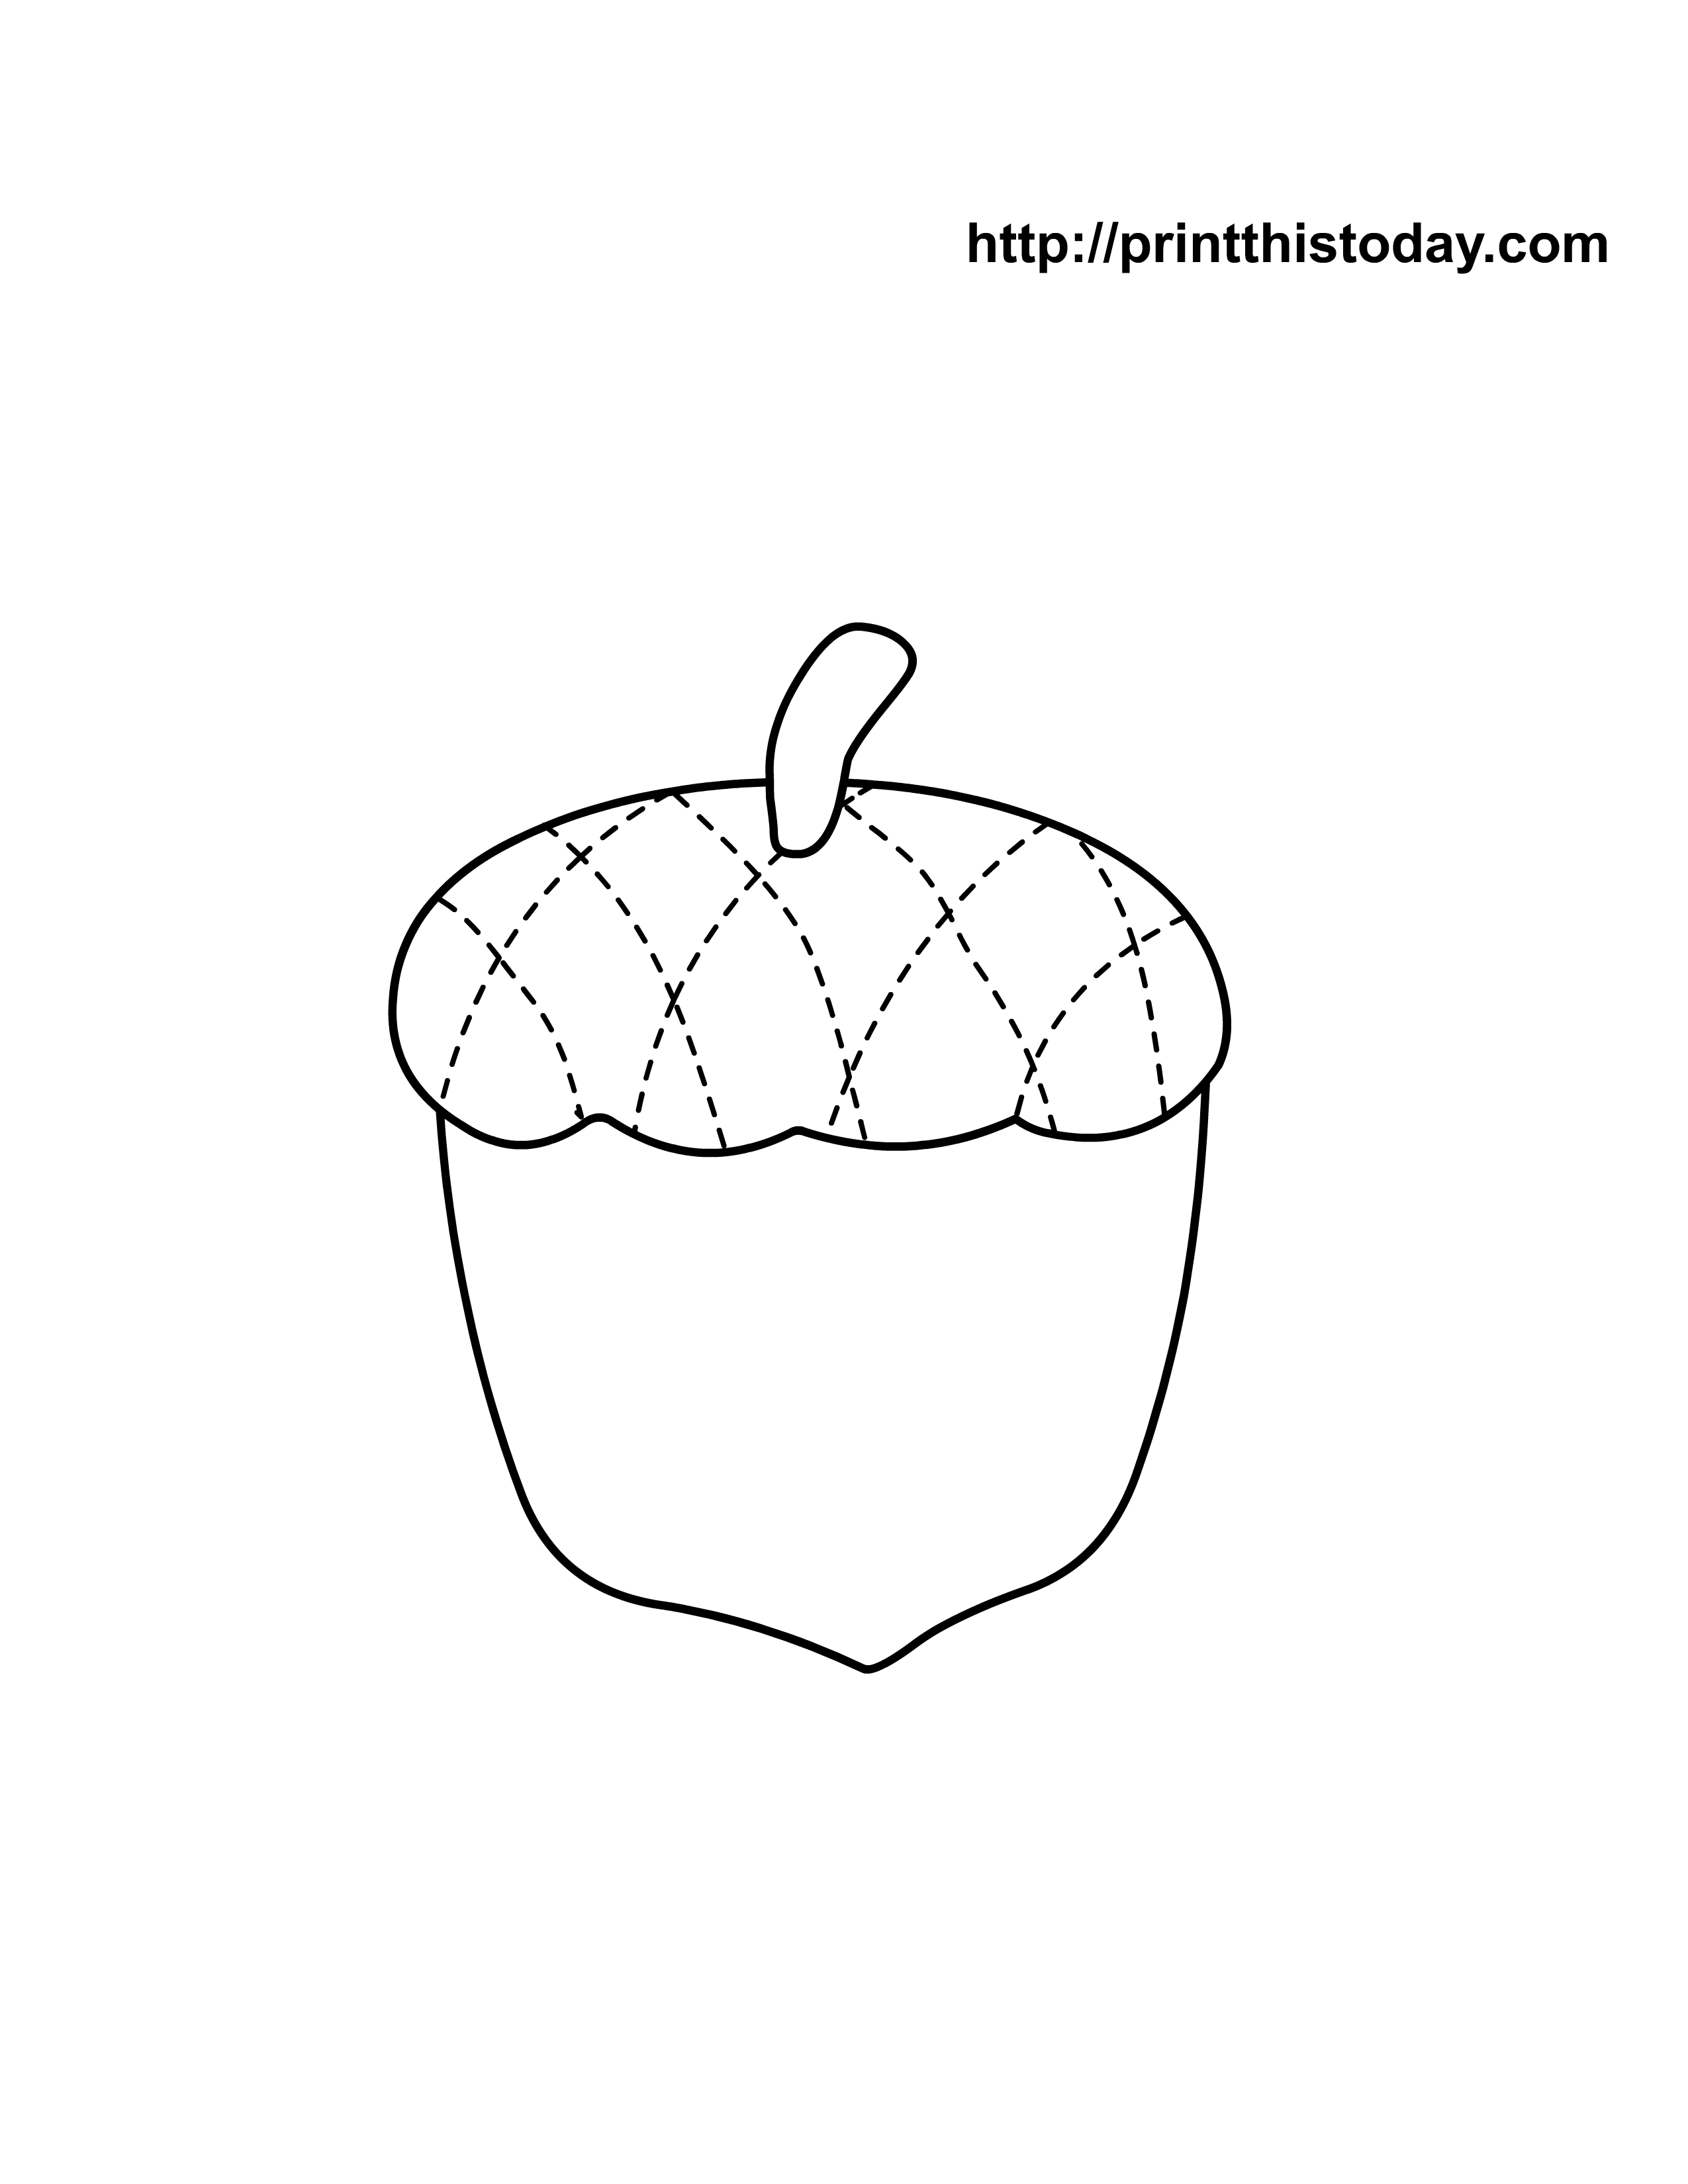 Free Printable Autumn, Fall Coloring Pages